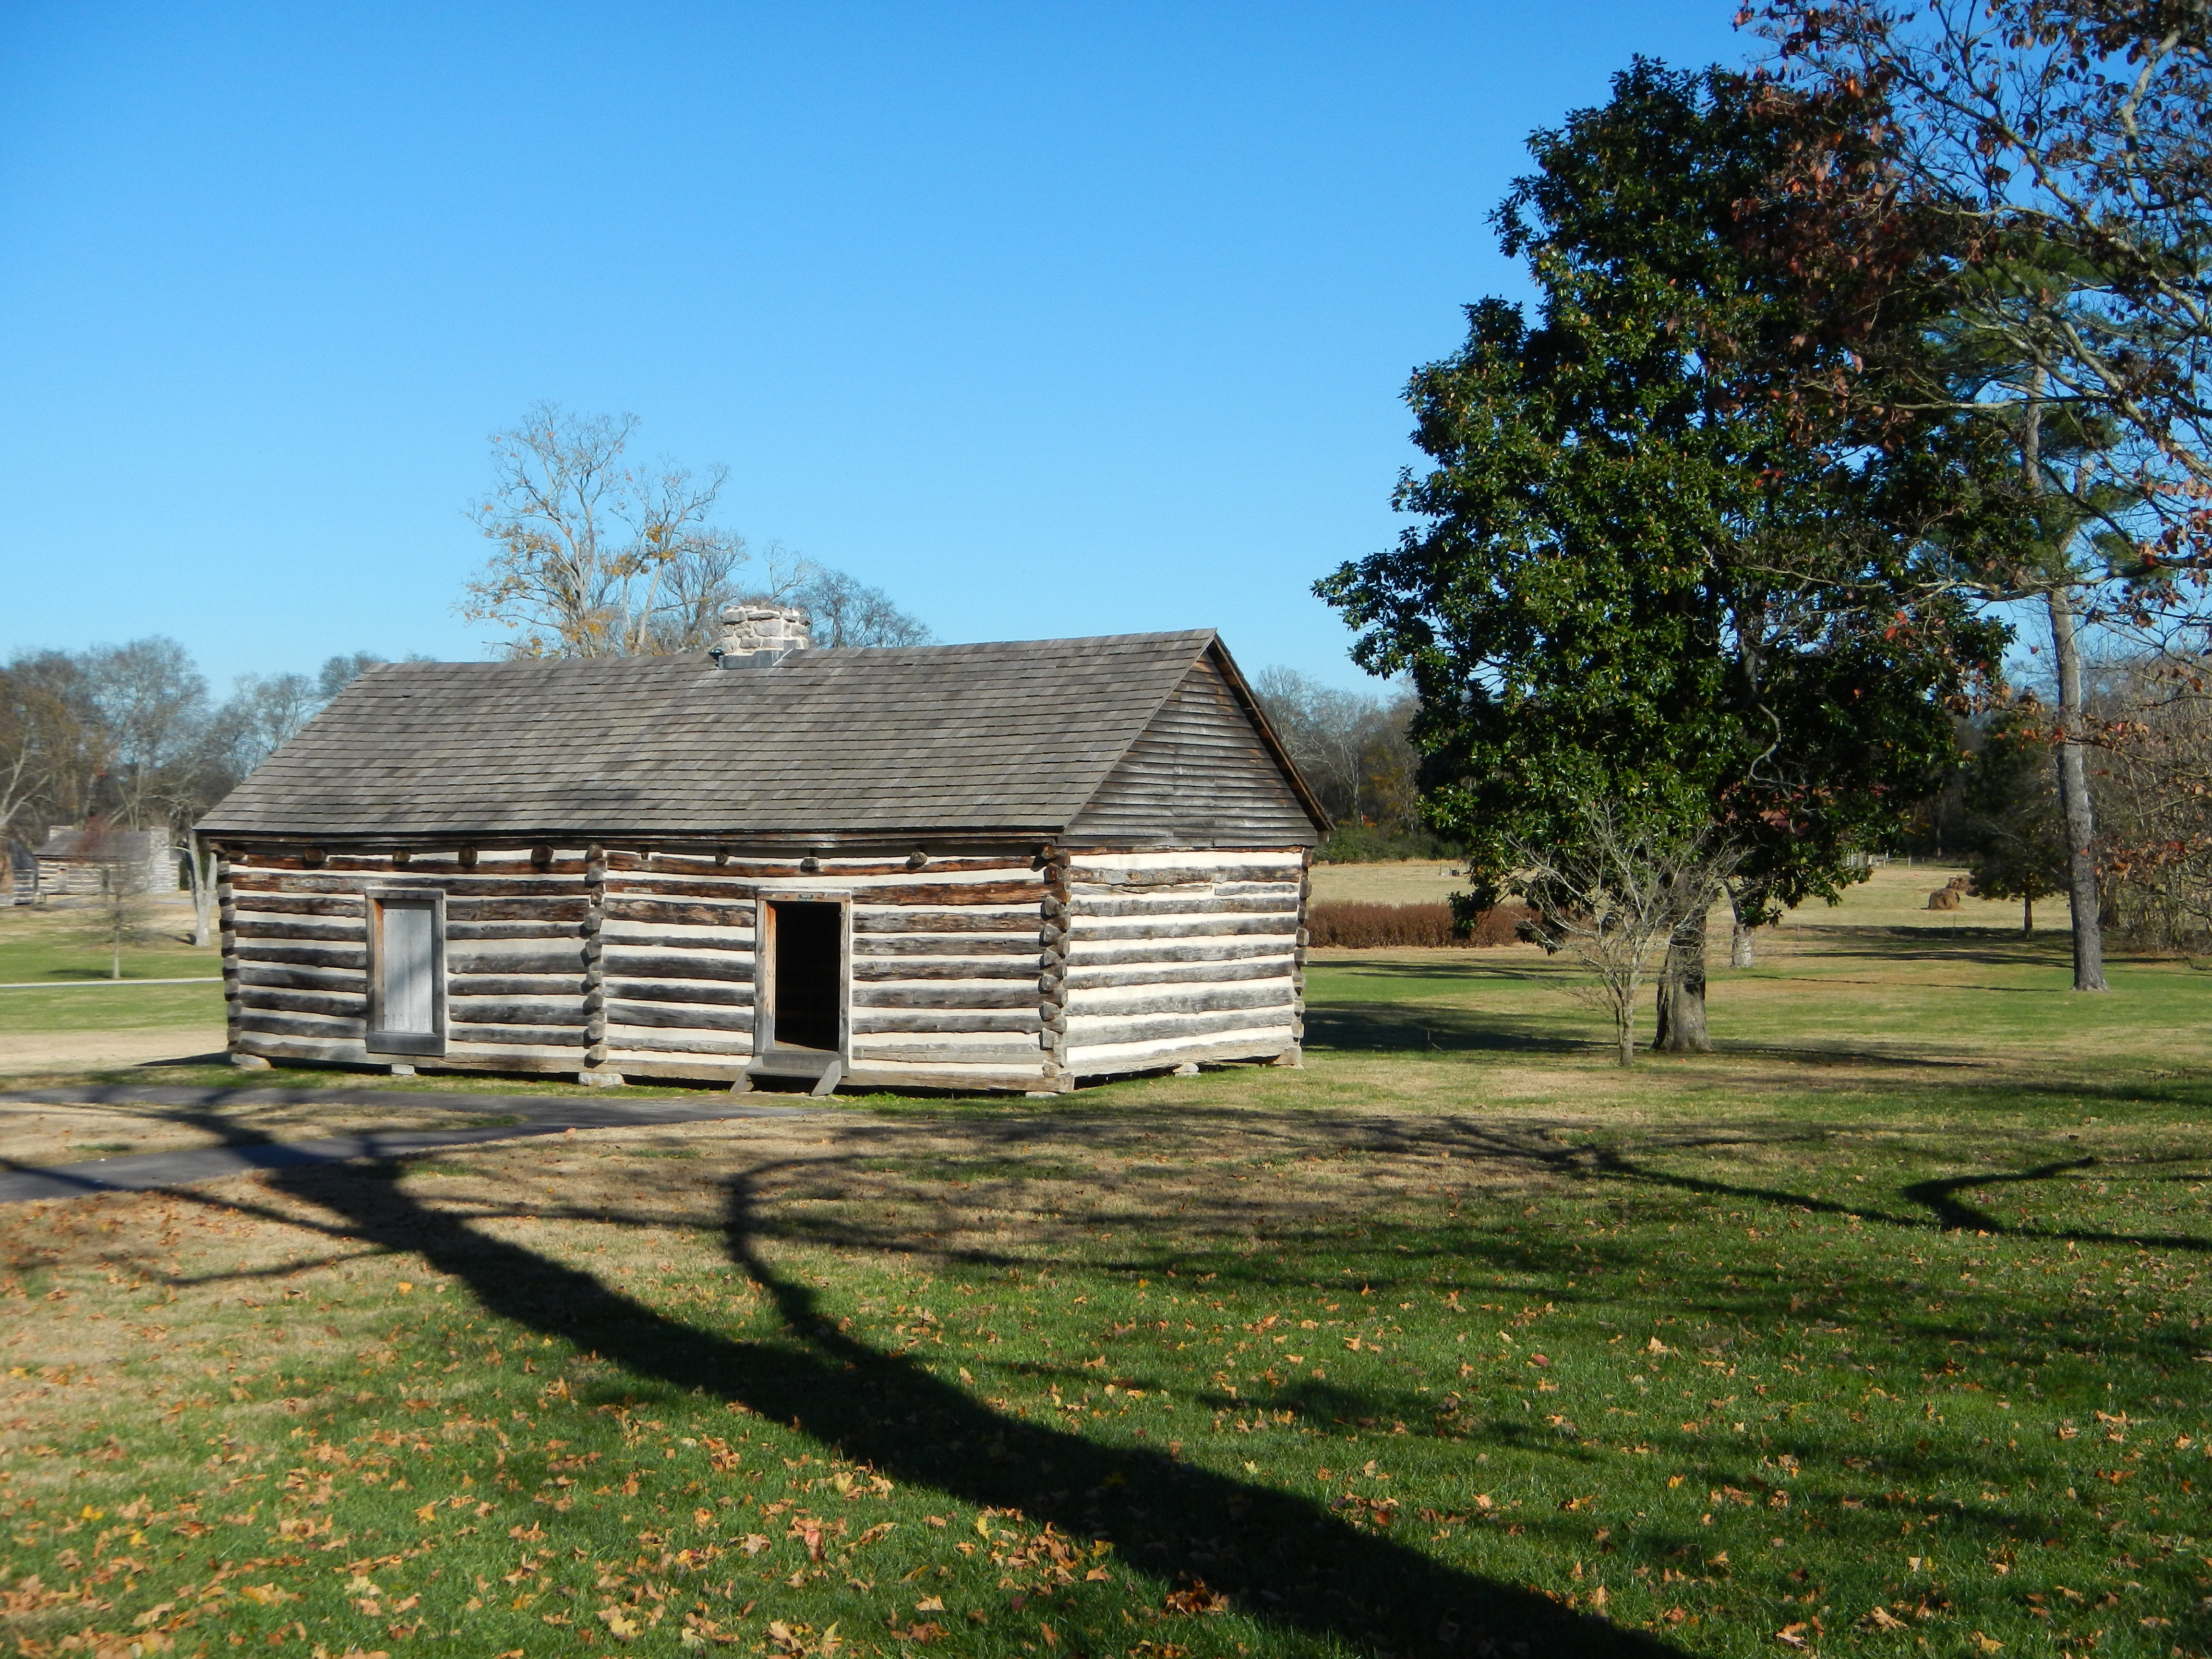 Alfred's Cabin.  One of the longest serving slaves owned by Jackson.  He stayed on after the property setup as a tourist location, working as a guide until his death.